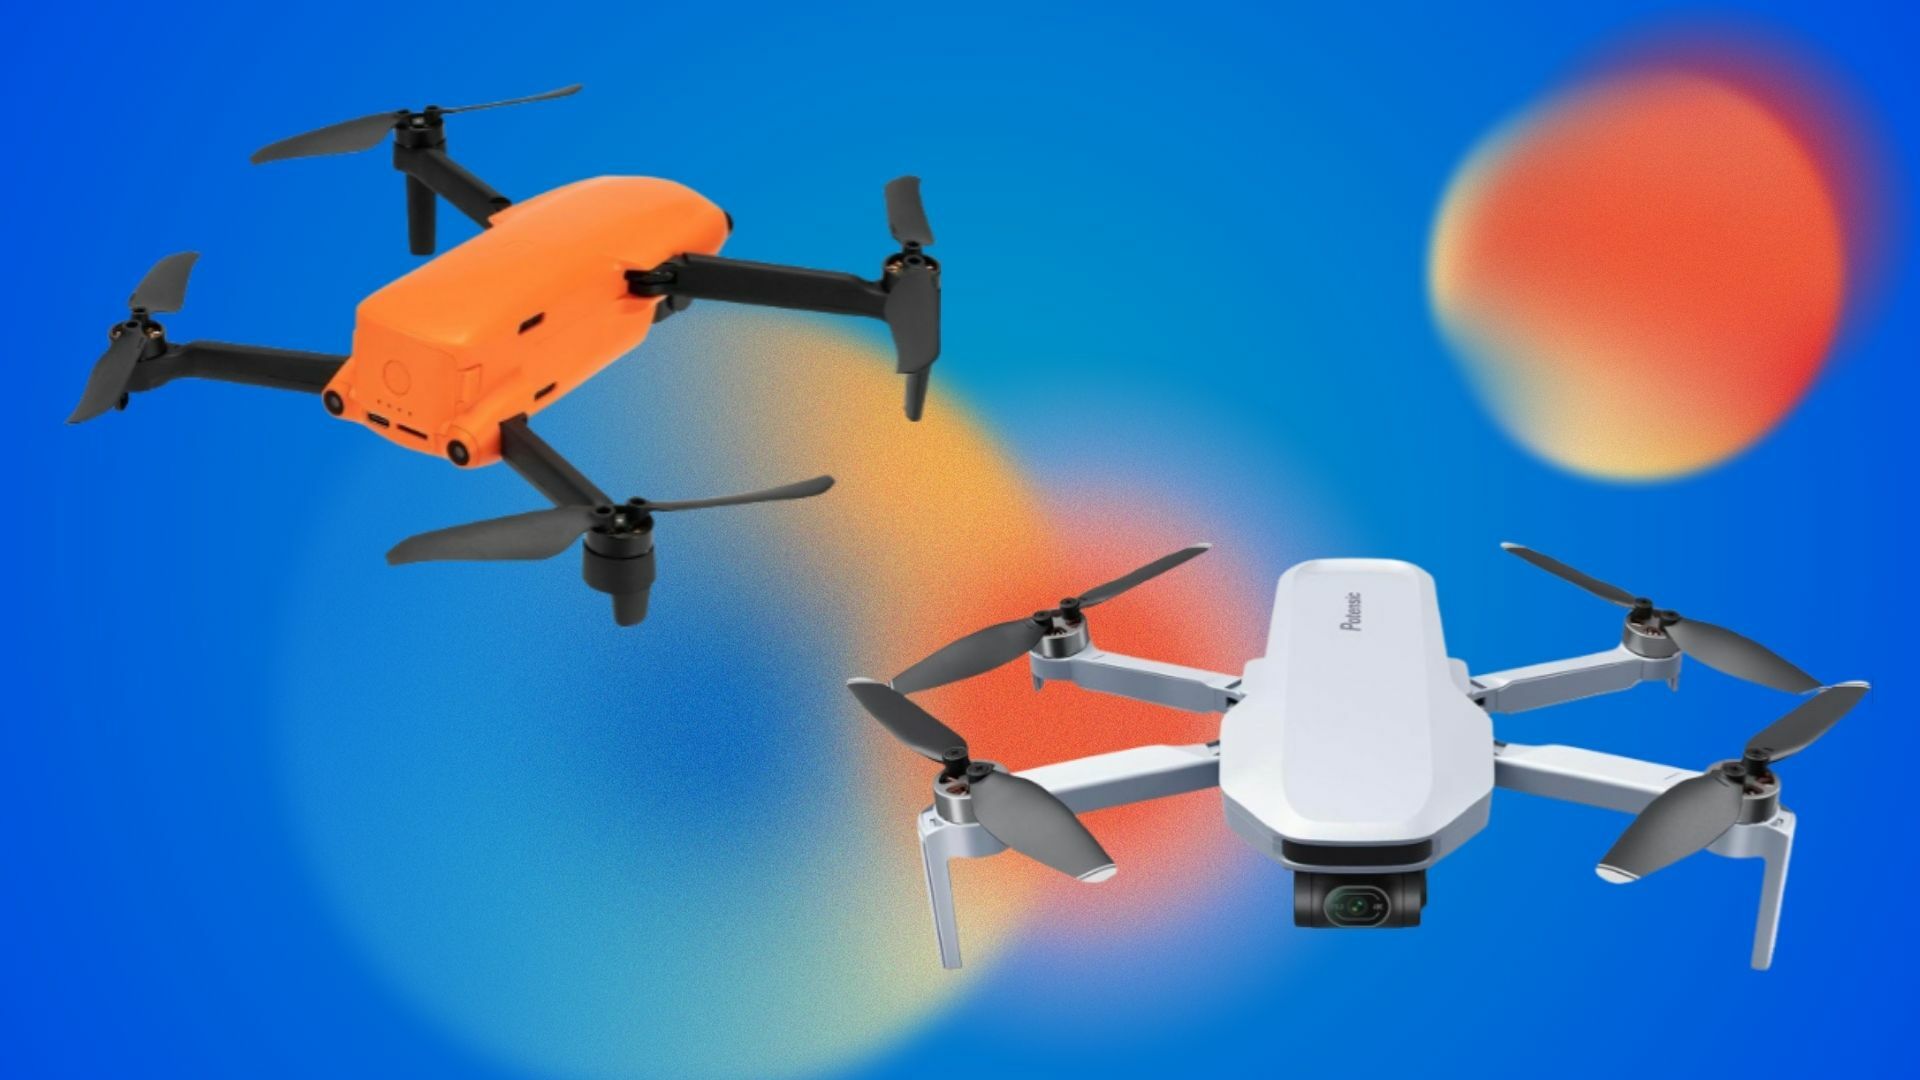 two drones on a blue background with orange accent bubbles